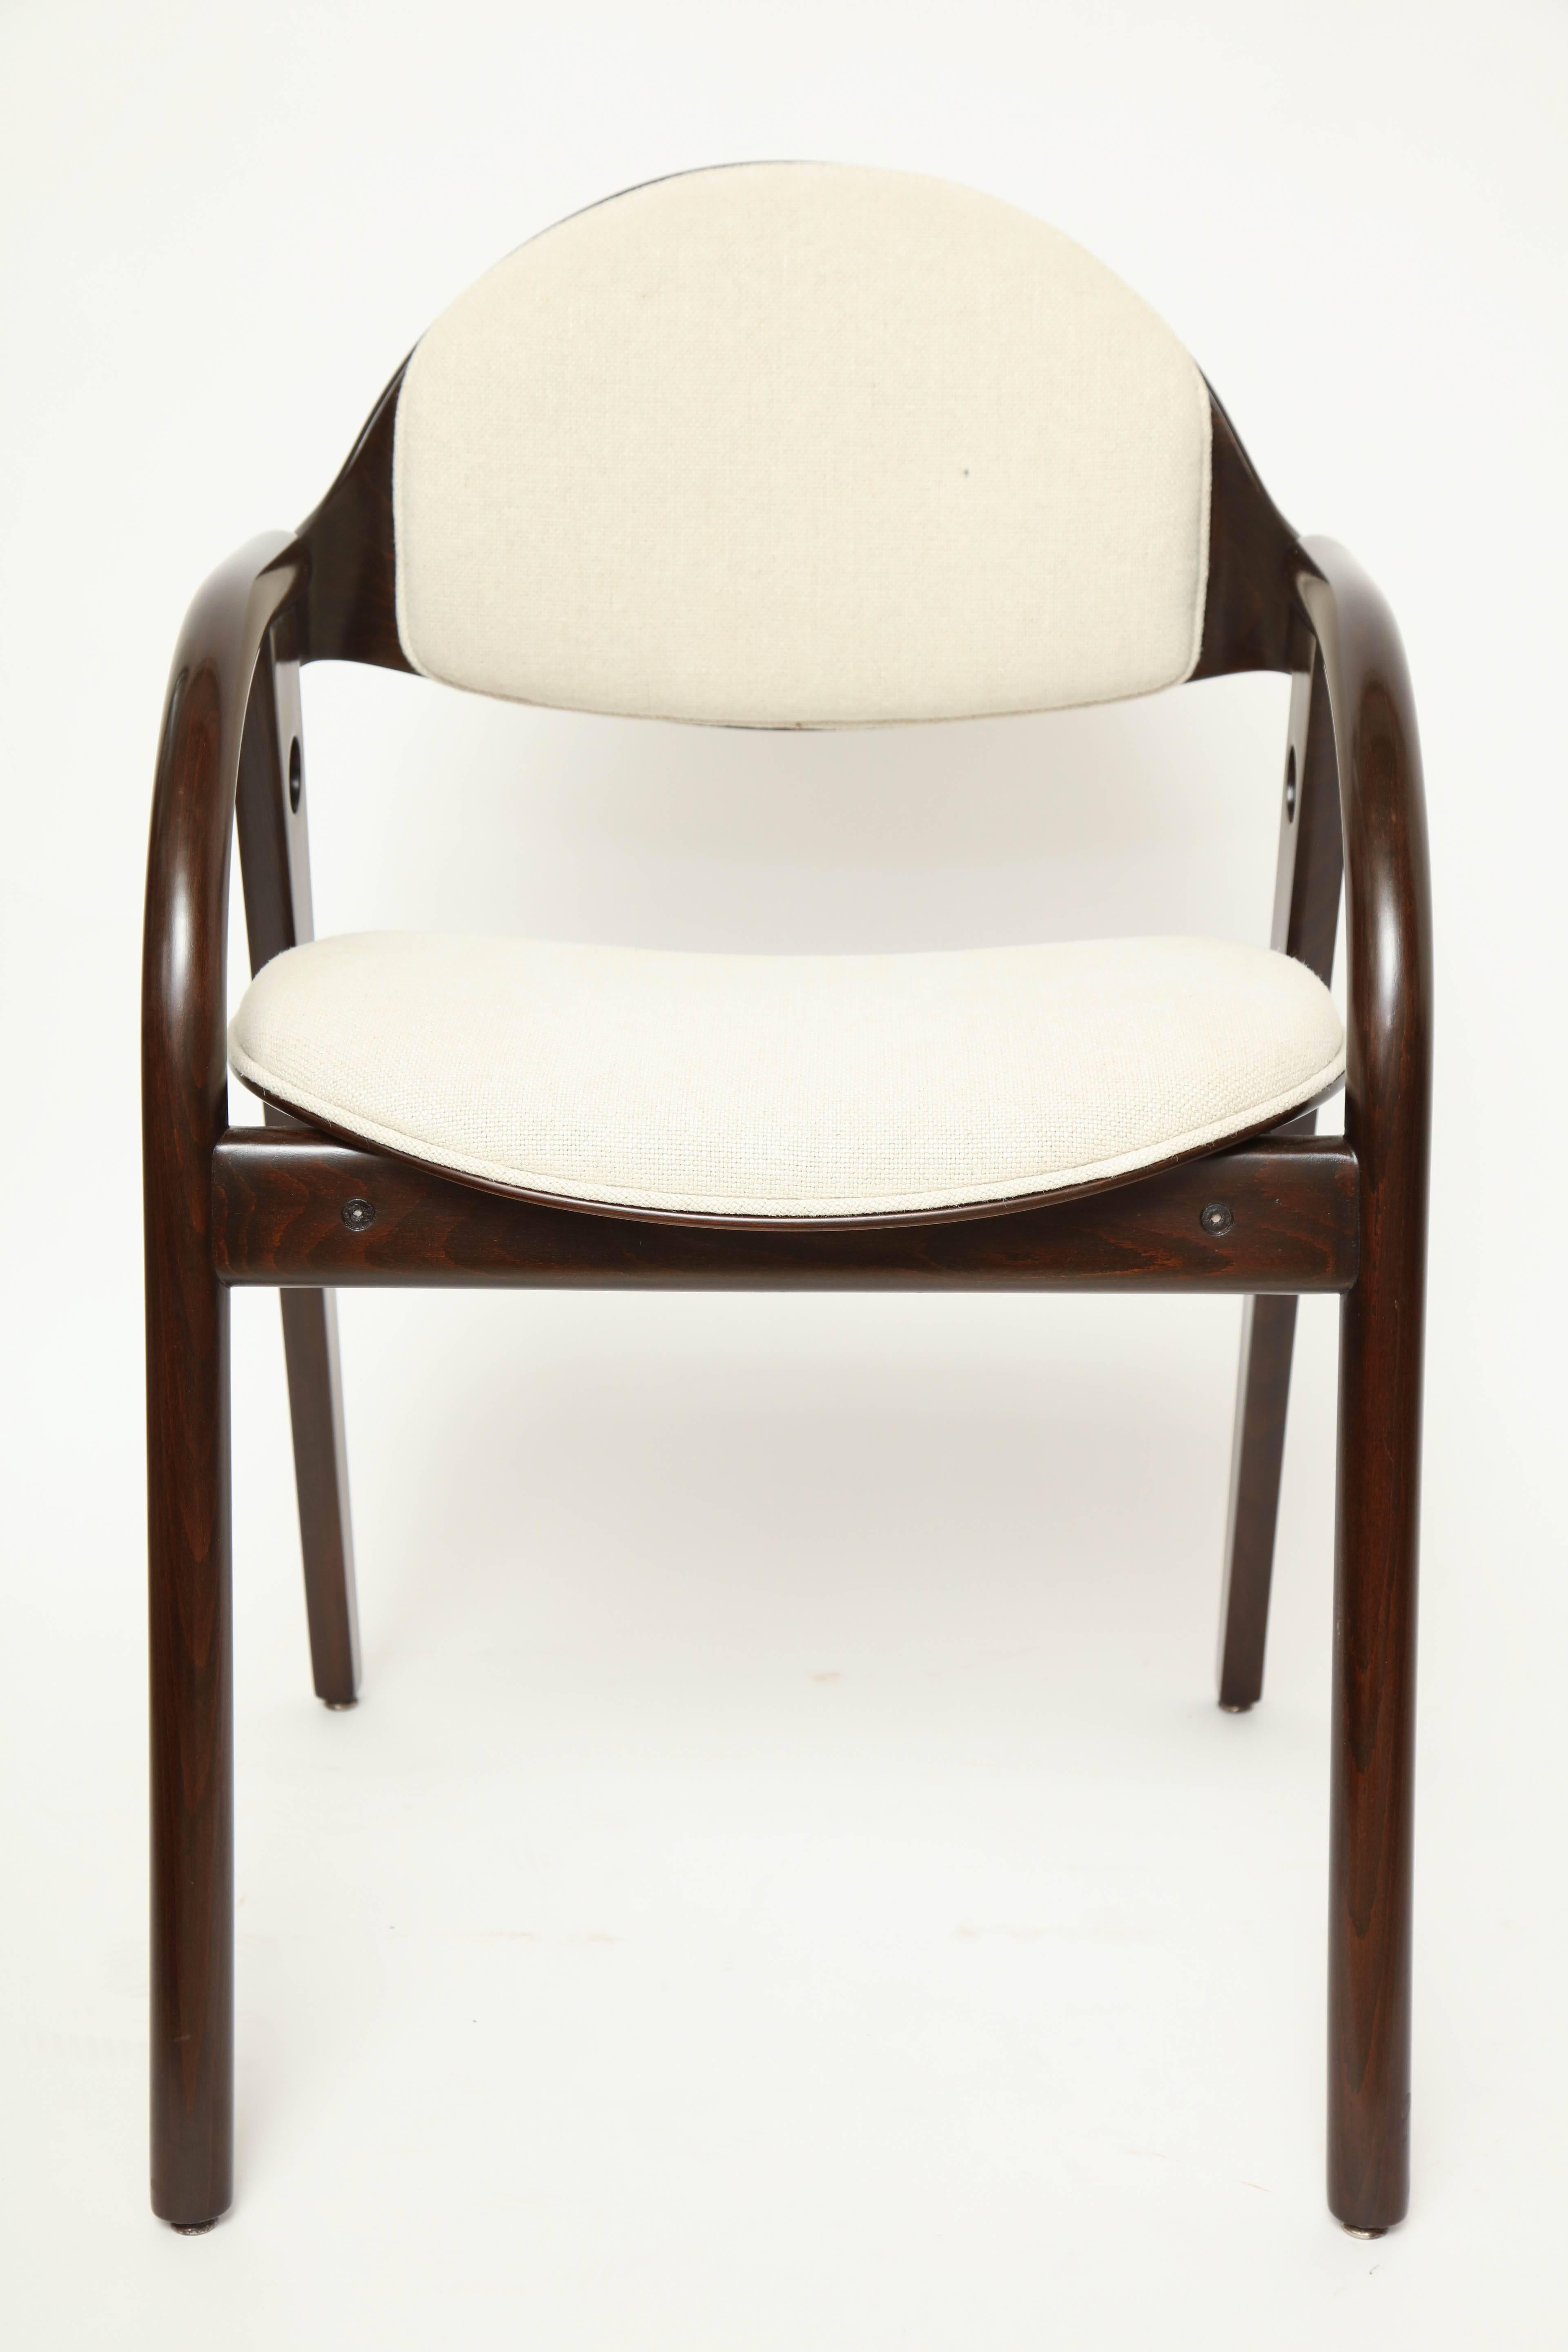 Set of Four Mid-Century Modern Dark Wood Chairs with Upholstered Seats For Sale 2